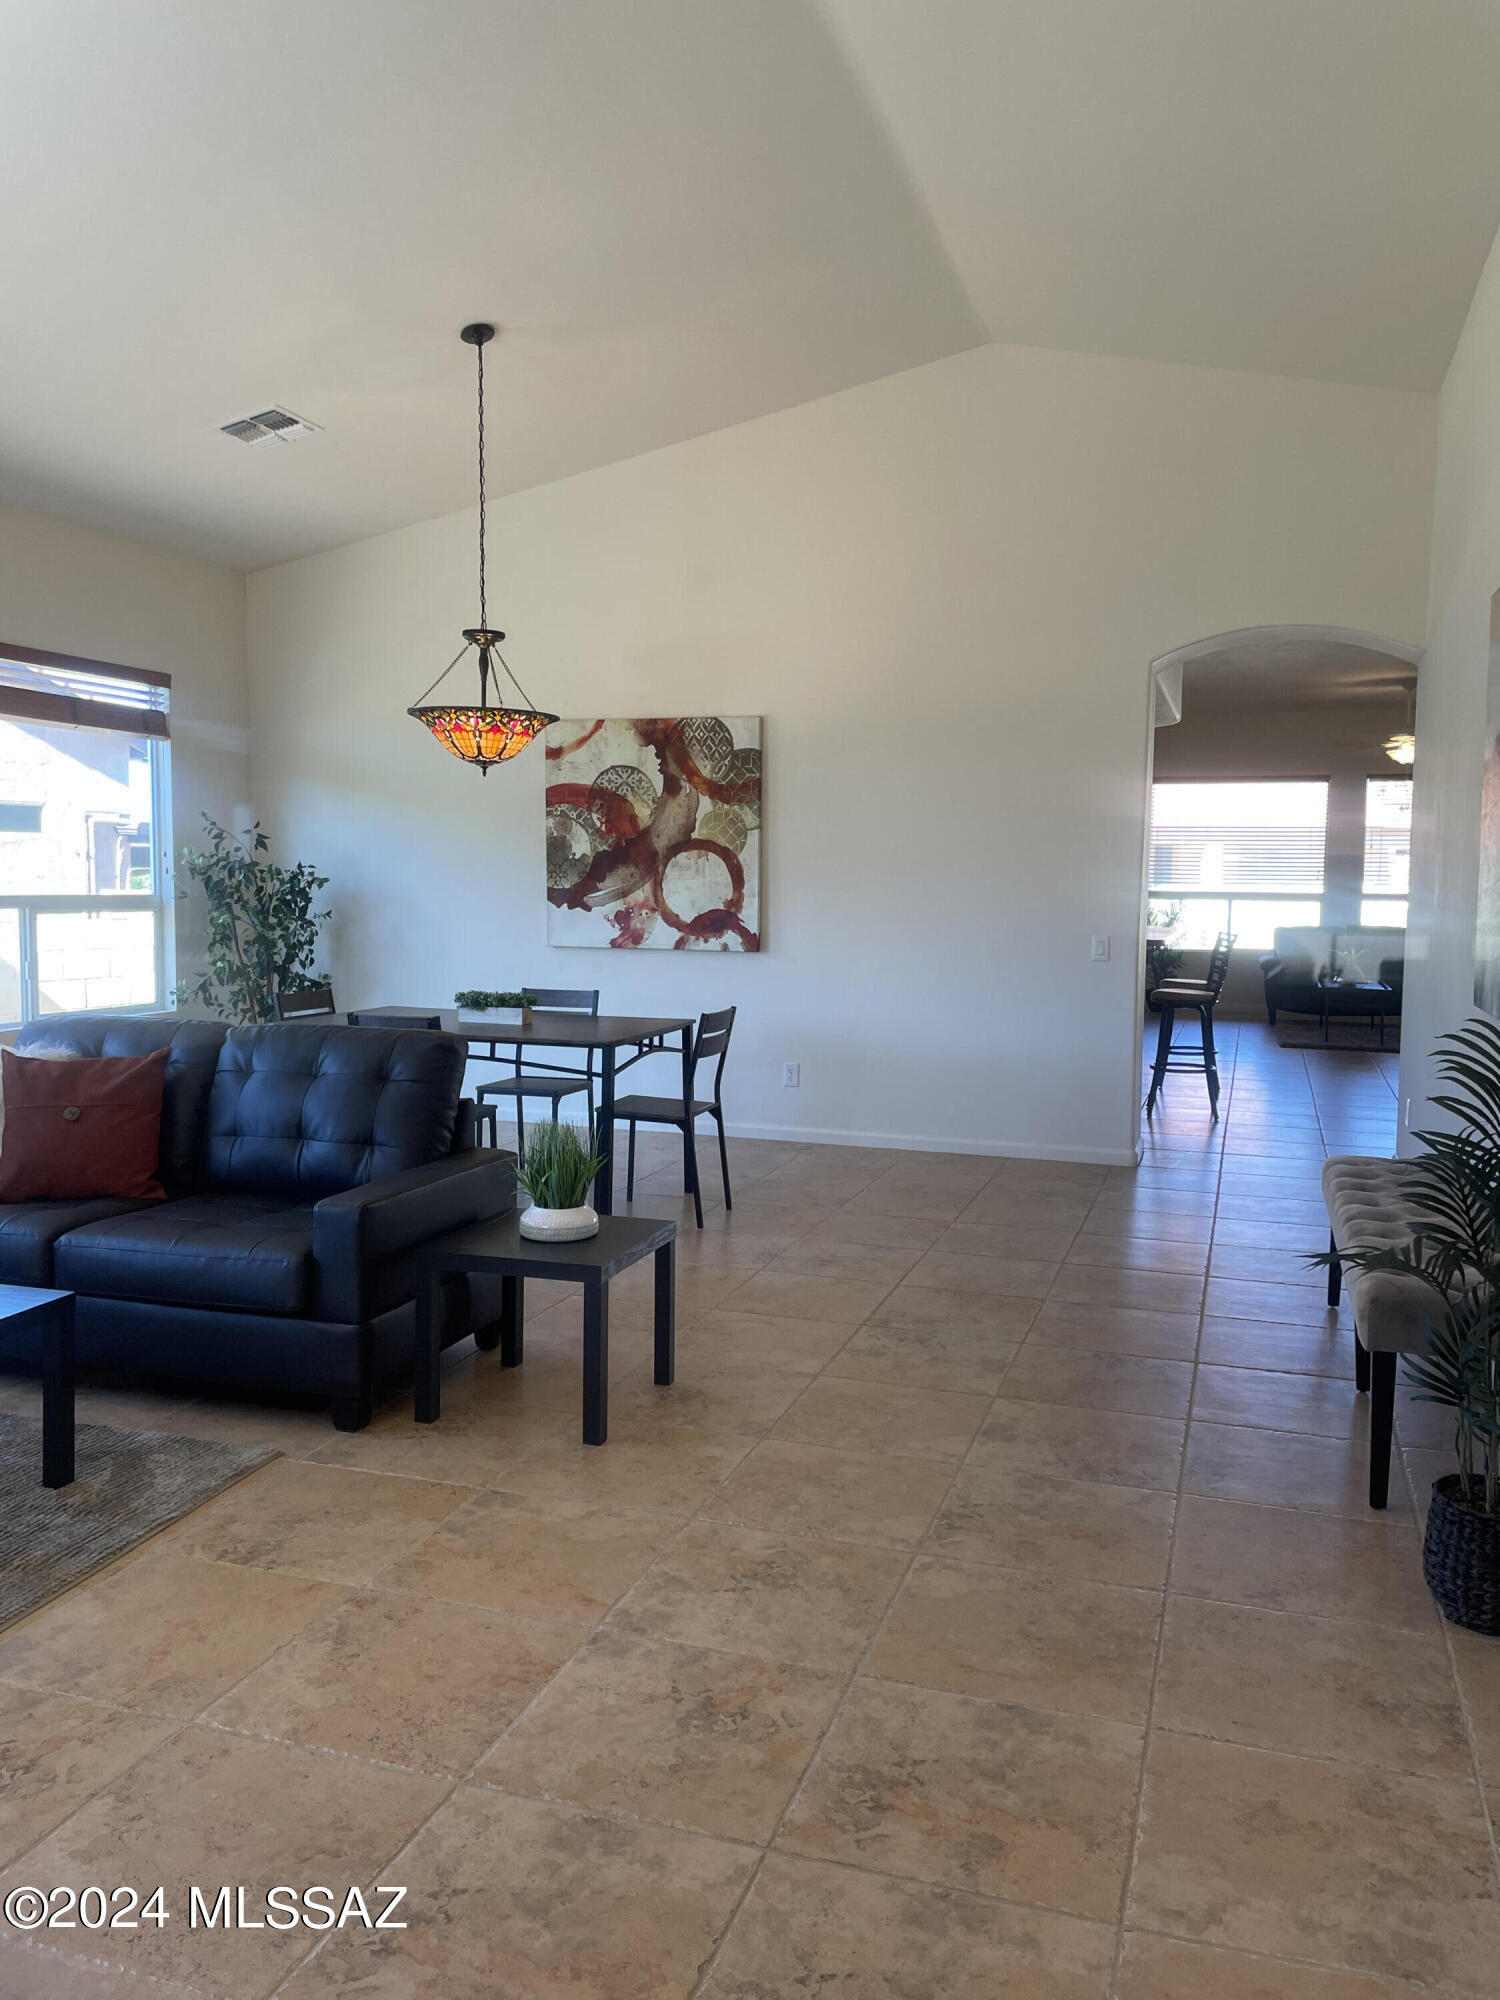 37656 S Terrace Park Drive, Saddlebrooke, Arizona, 85739, United States, 3 Bedrooms Bedrooms, ,3 BathroomsBathrooms,Residential,For Sale,37656 S Terrace Park Drive,1511184